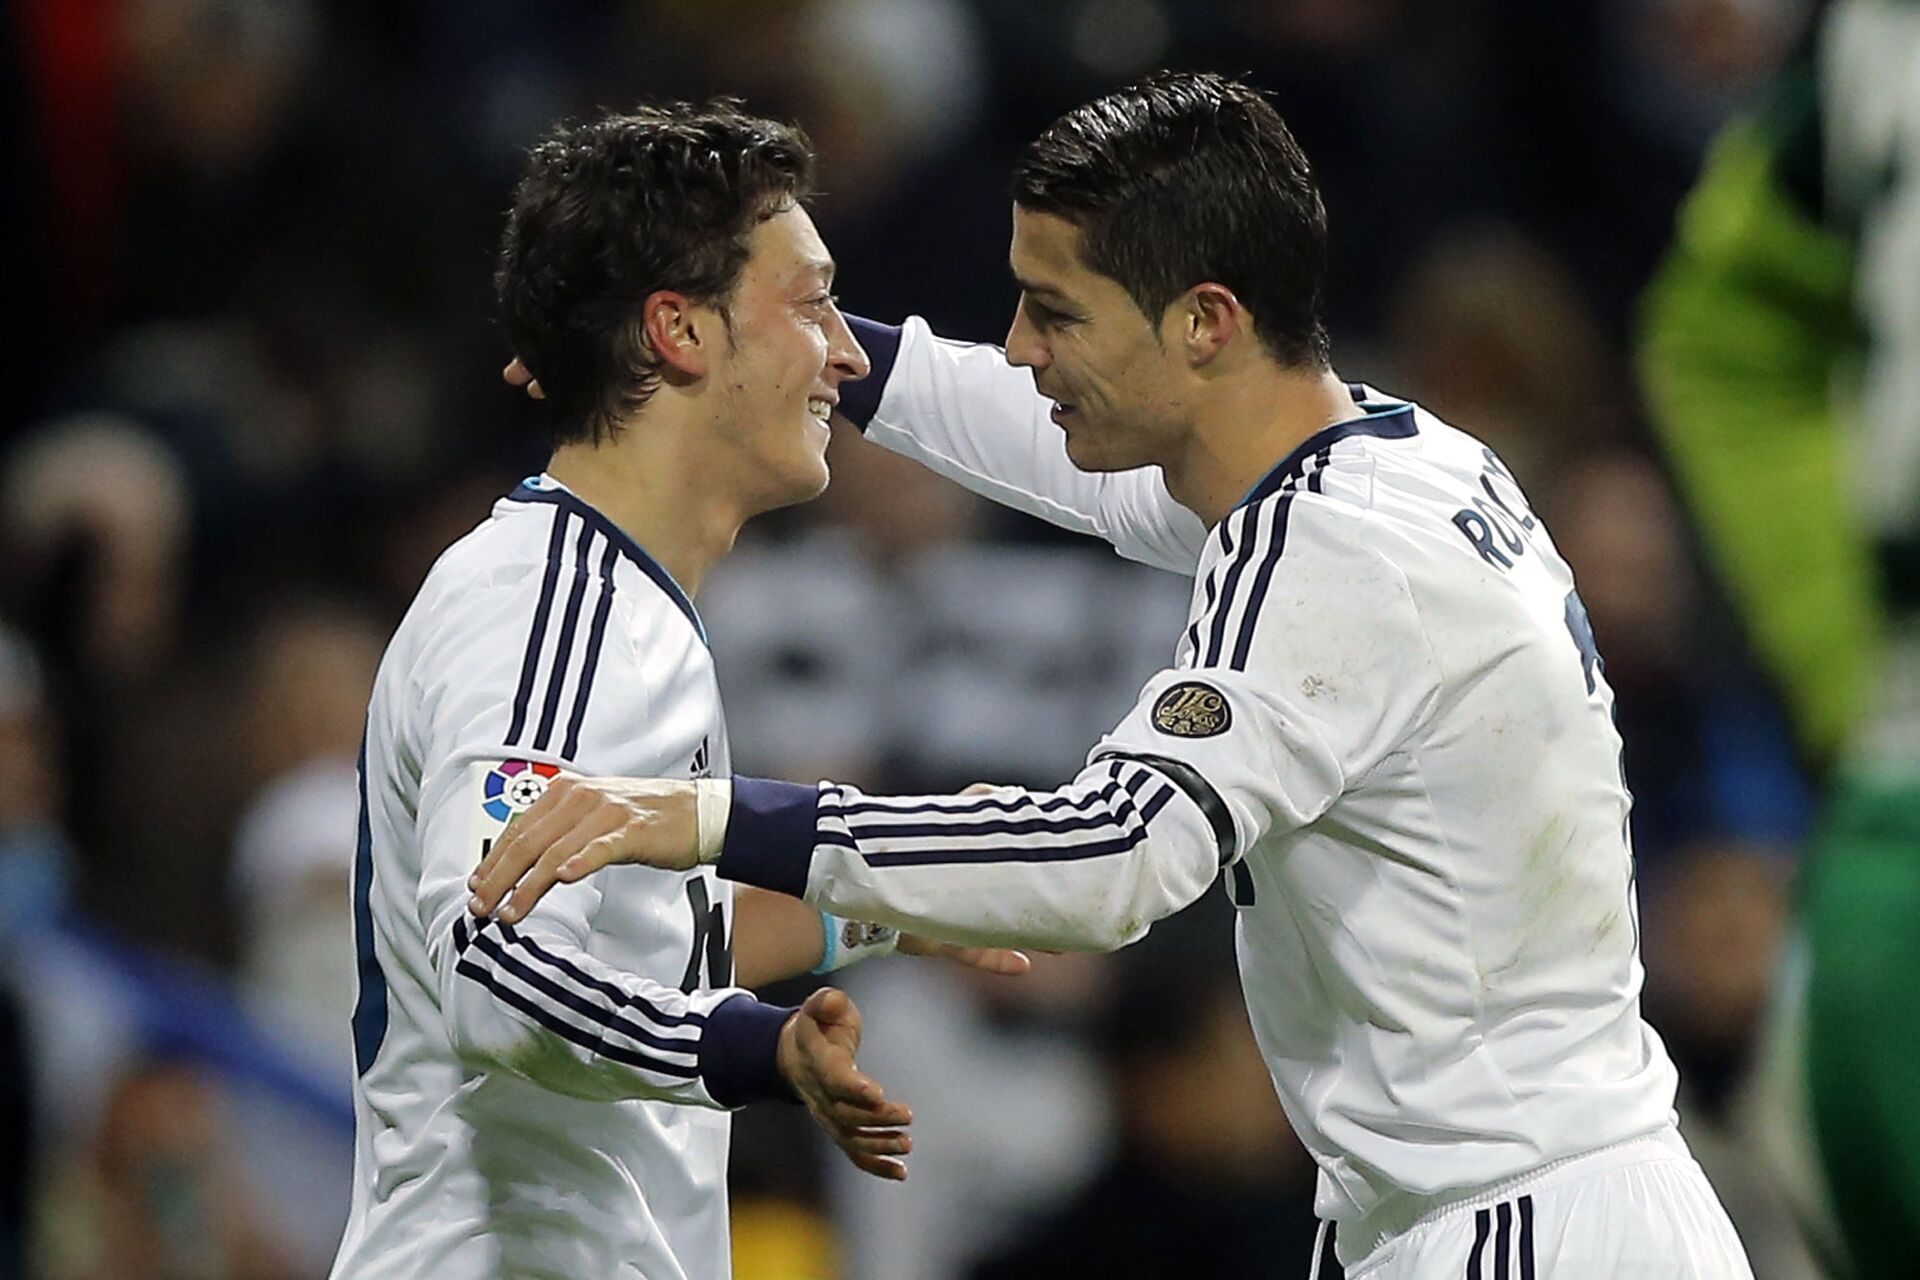 Real Madrid's Mesut Ozil from Germany, left, celebrates with Cristiano Ronaldo from Portugal after scoring a goal against Atletico de Madrid during a Spanish La Liga soccer match at the Santiago Bernabeu stadium in Madrid, Saturday, Dec. 1, 2012 - Sputnik International, 1920, 07.09.2021